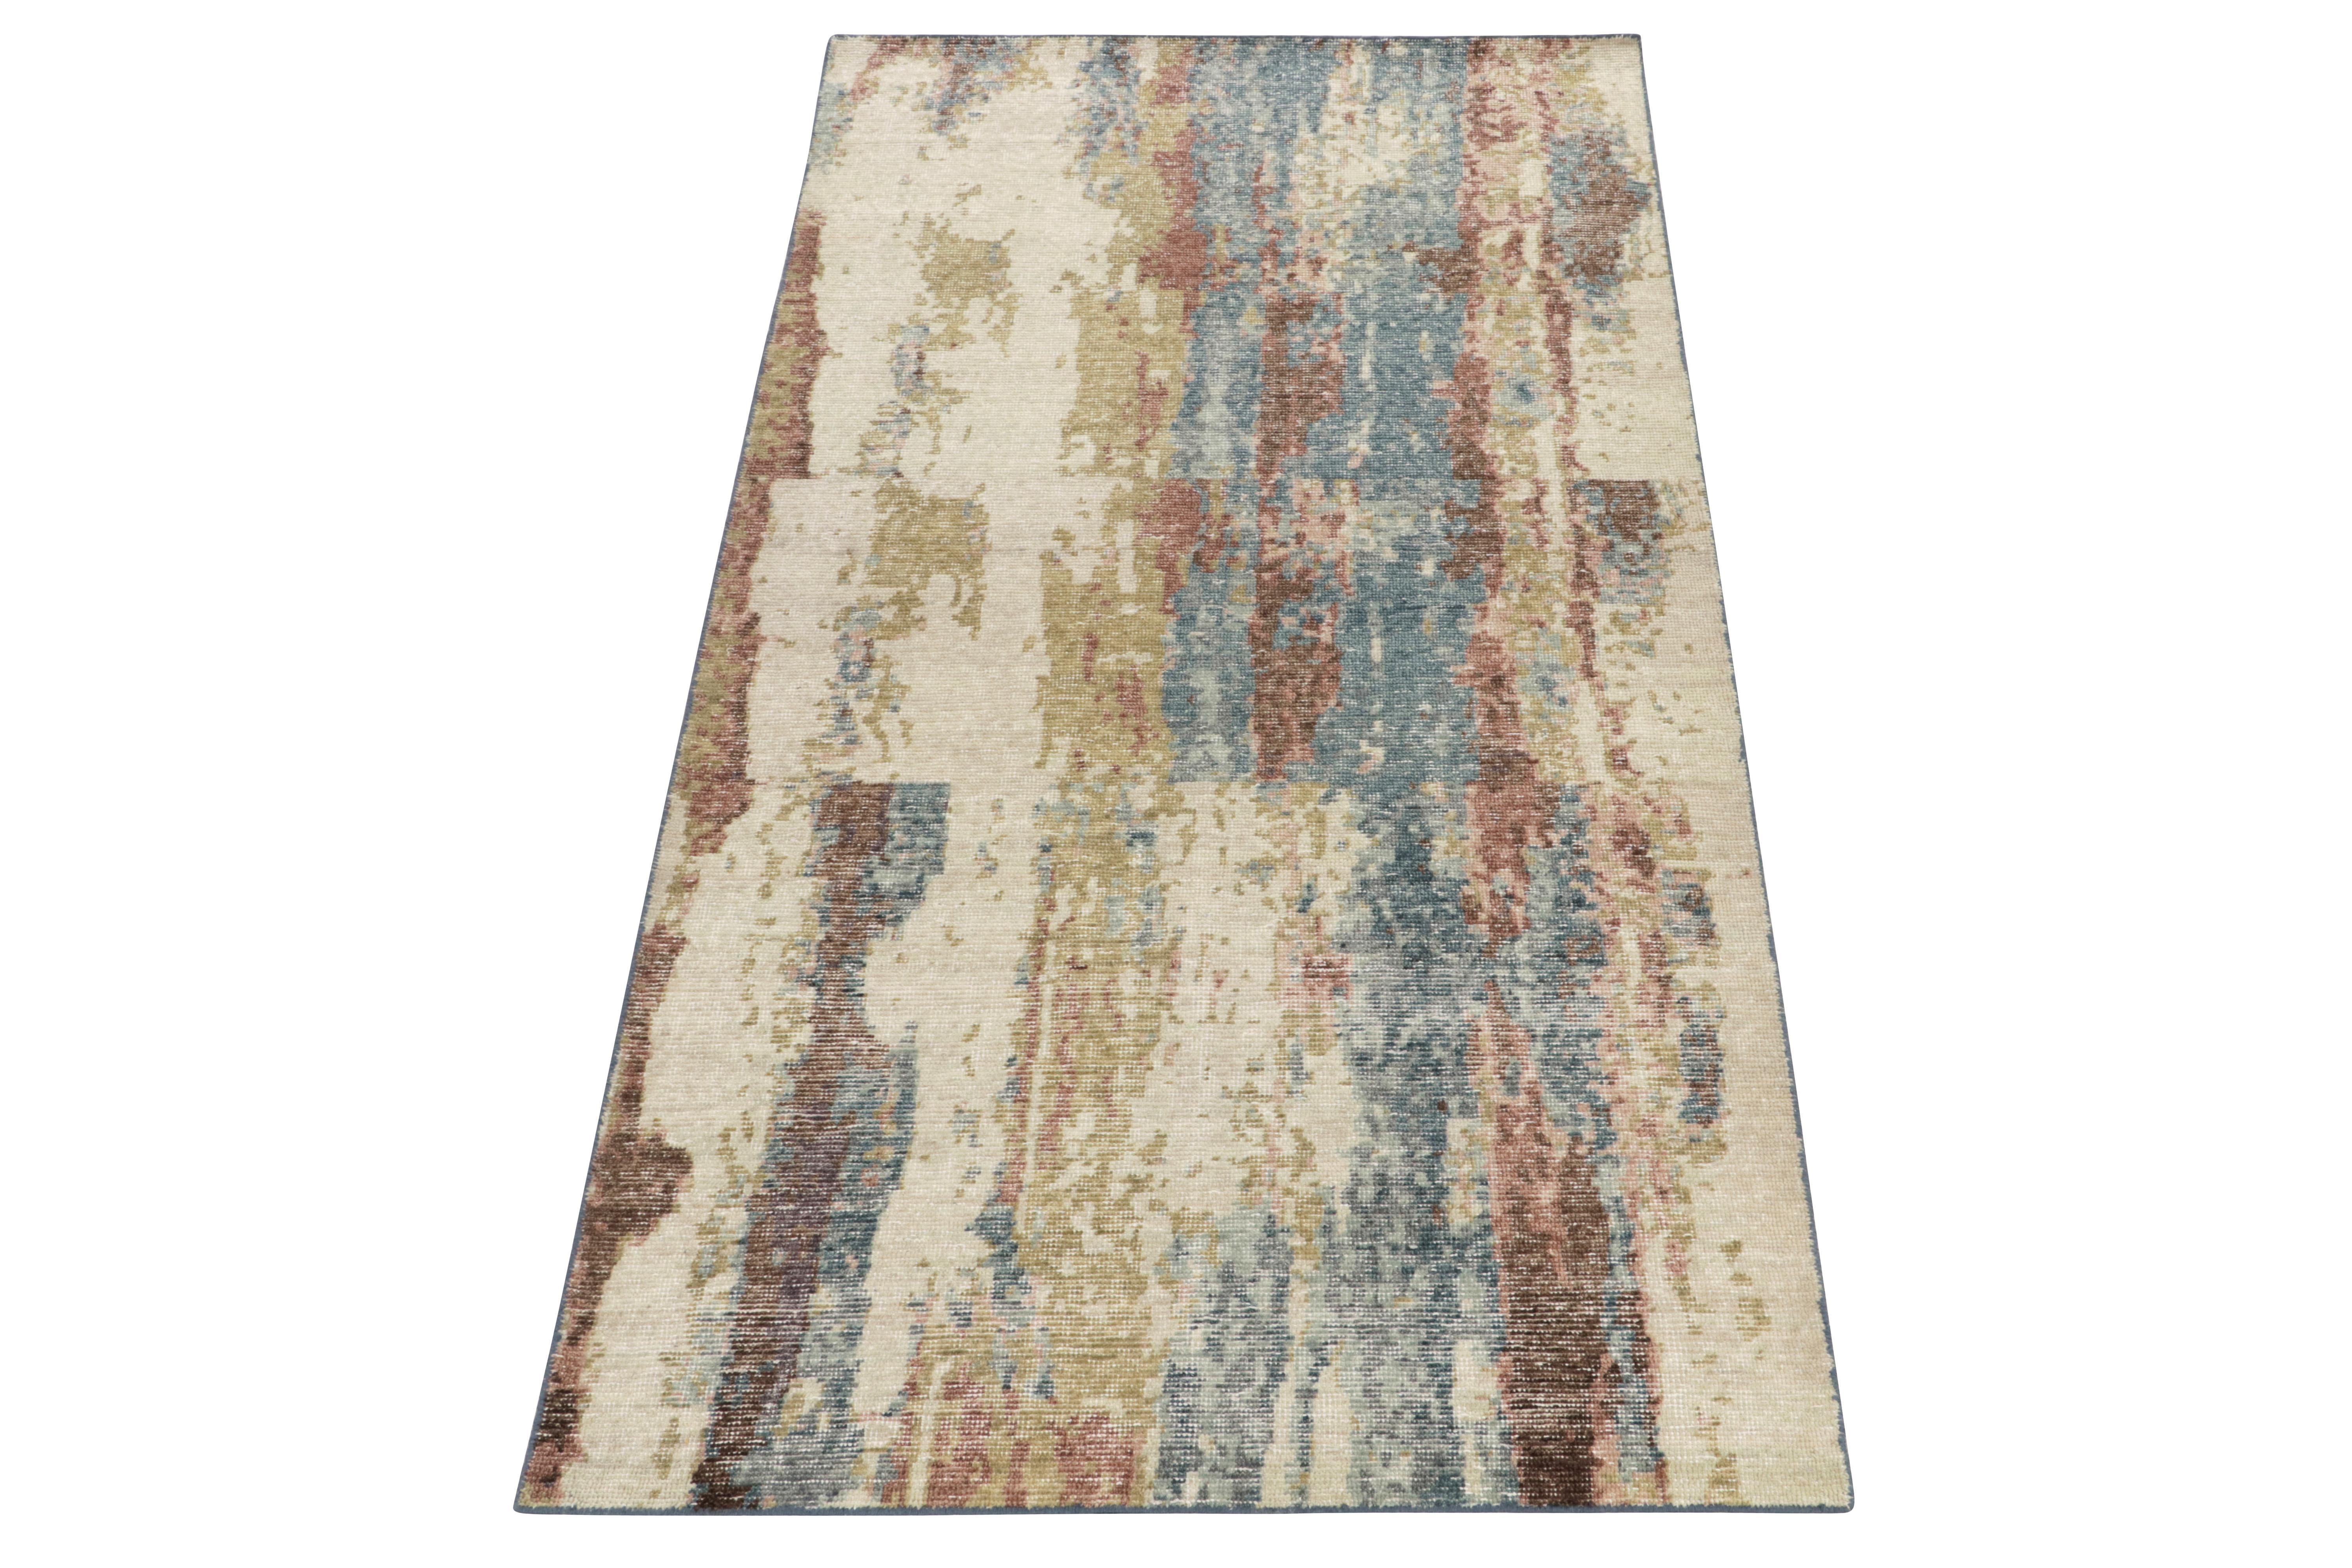 From Rug & Kilim’s Homage Collection, a 4x8 distressed style abstract rug enjoying a refreshing colorplay of lustrous blue, off-white, sea green & mud brown. Kisses of rusted pink further bring out the melting, inviting sense of life this painterly